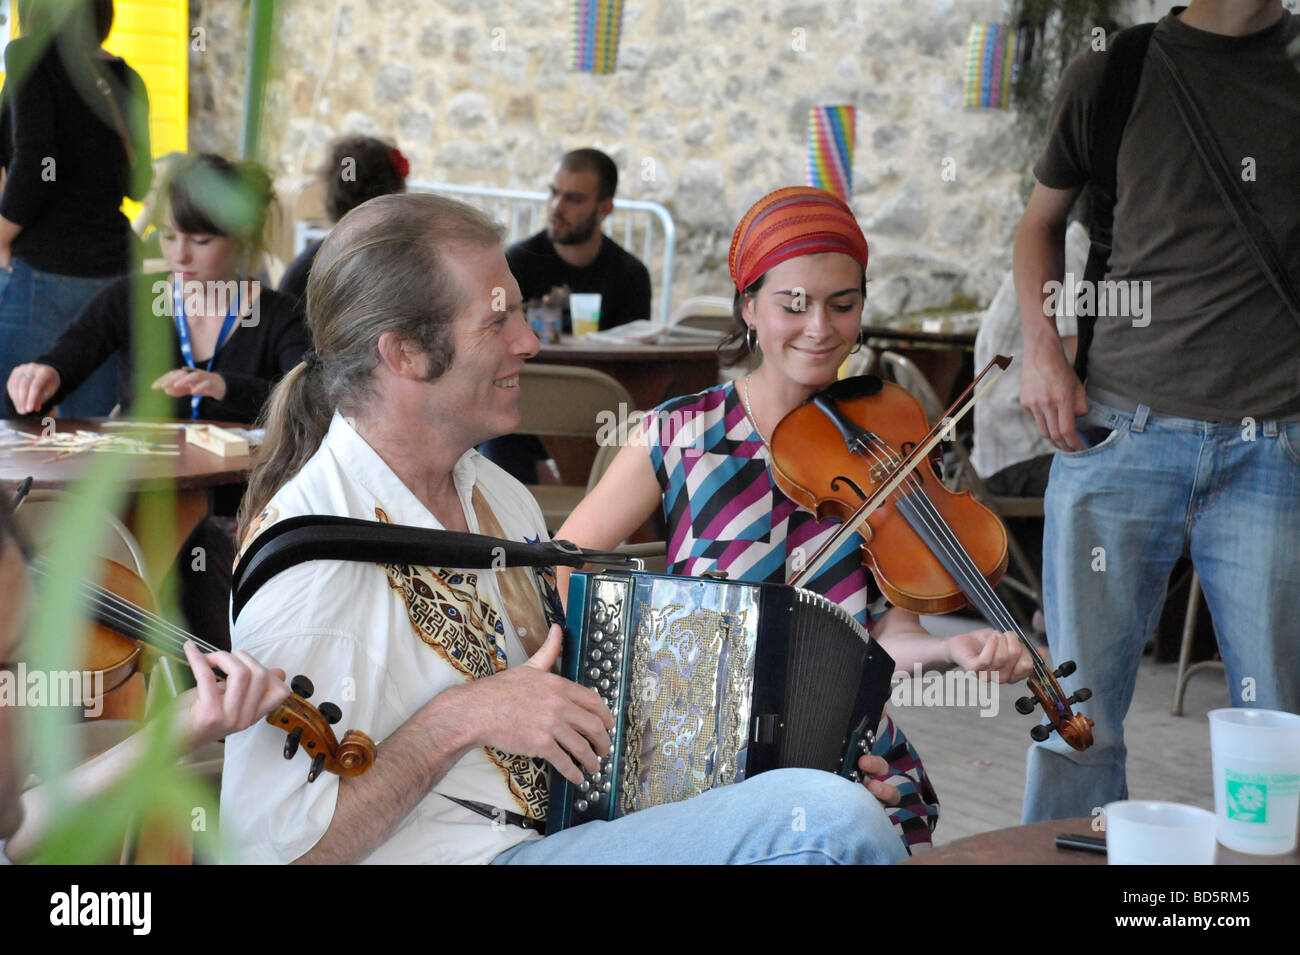 Folk diatonic accordionist and fiddle musicians enjoying a musical jamming session in French bar Stock Photo